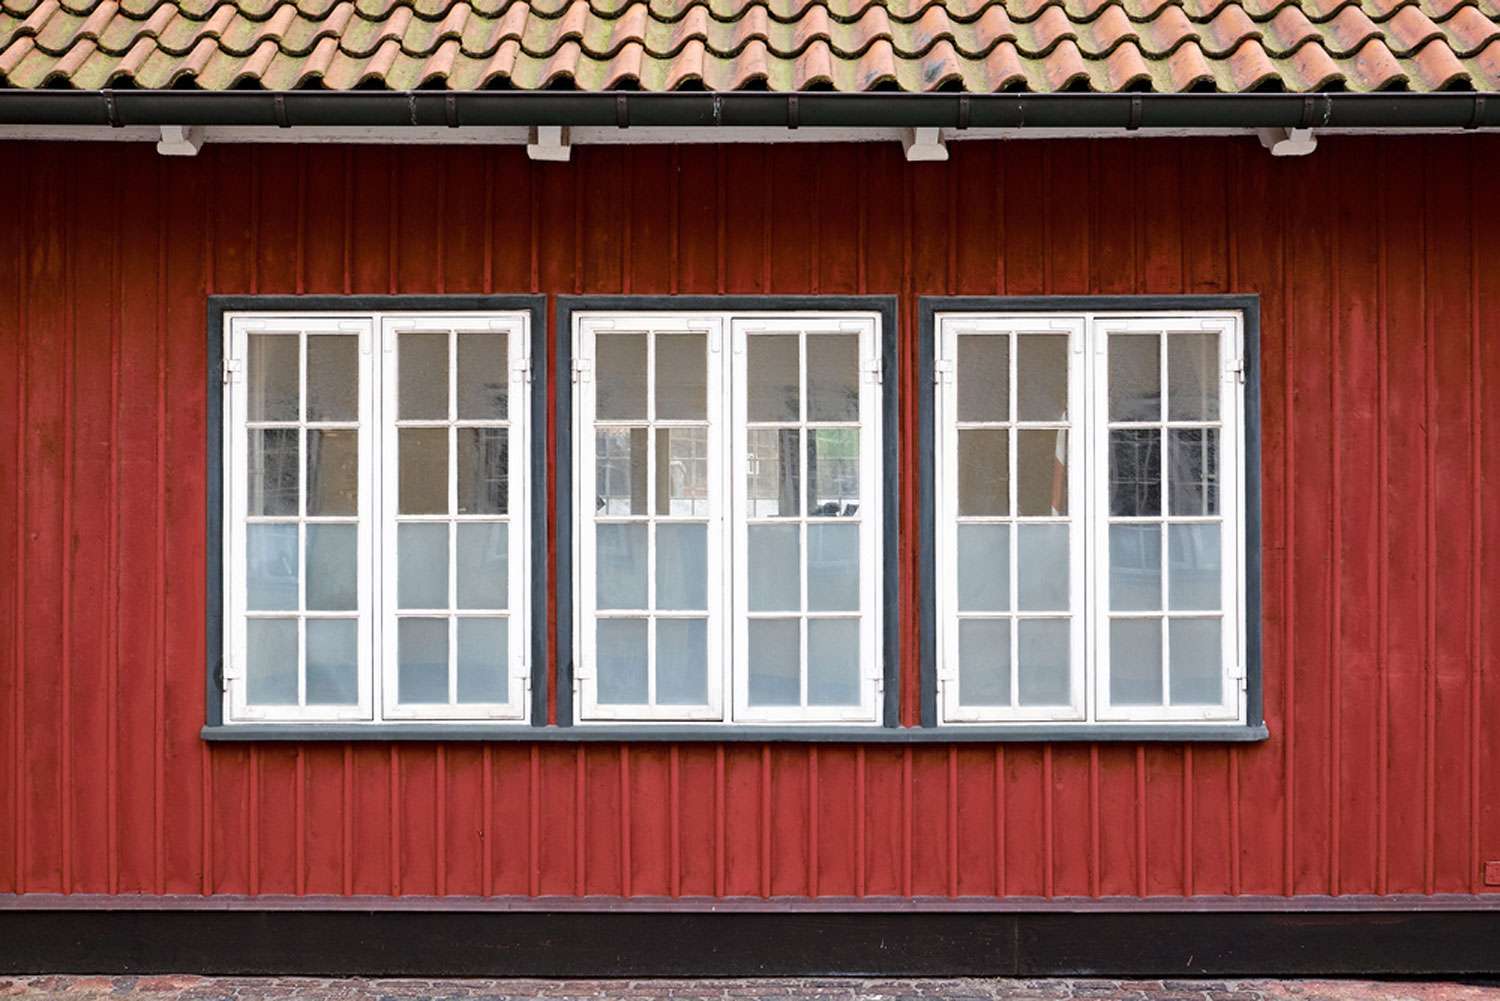 Three white painted casement windows with partly frosted glazing, in a red painted wood plank facade, How Big Can A Casement Window Be?